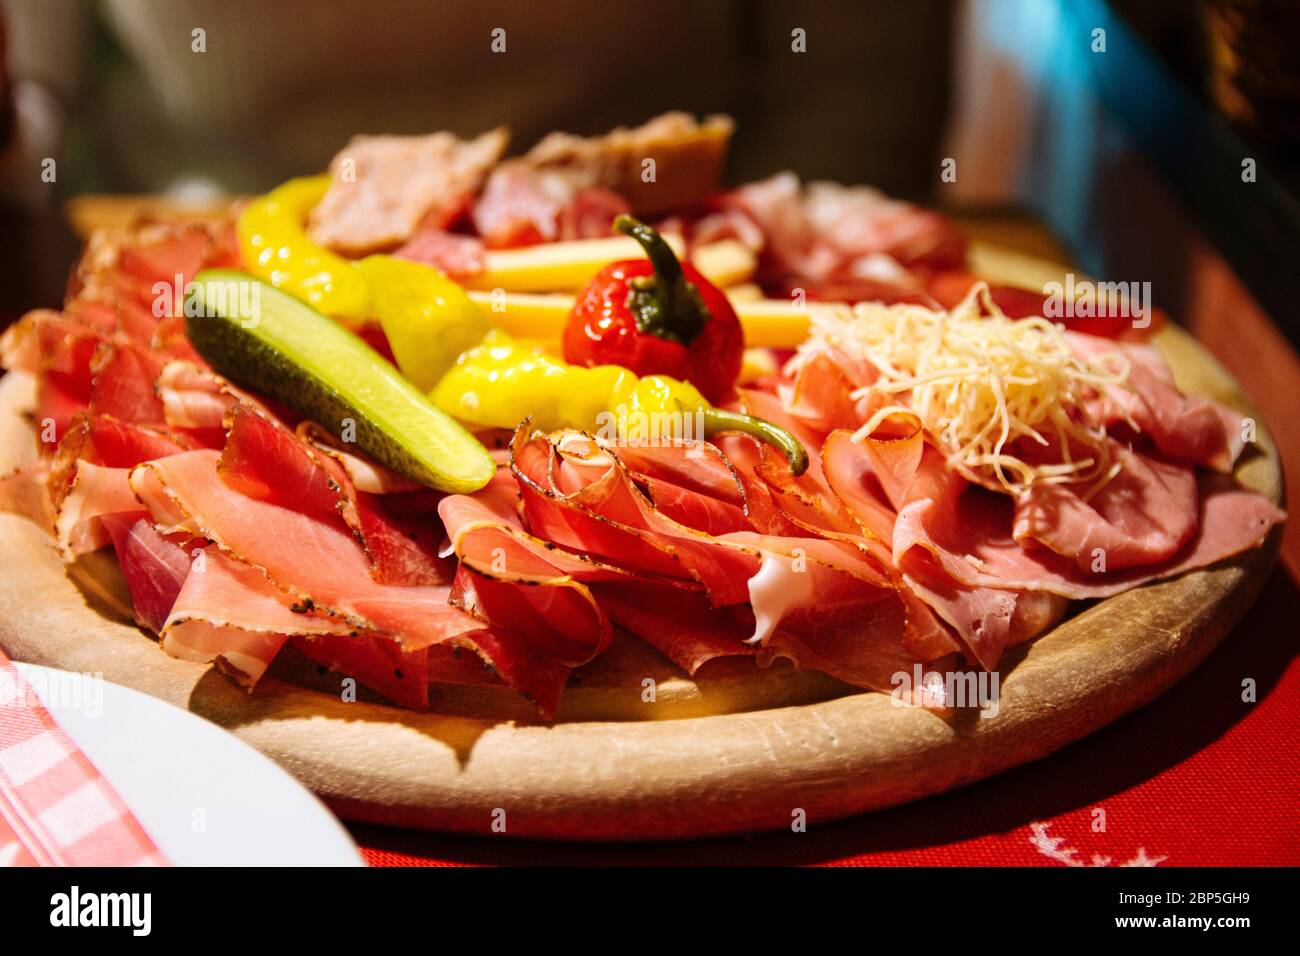 A typical tyrolean mixed cold platter served on a wooden board Stock Photo